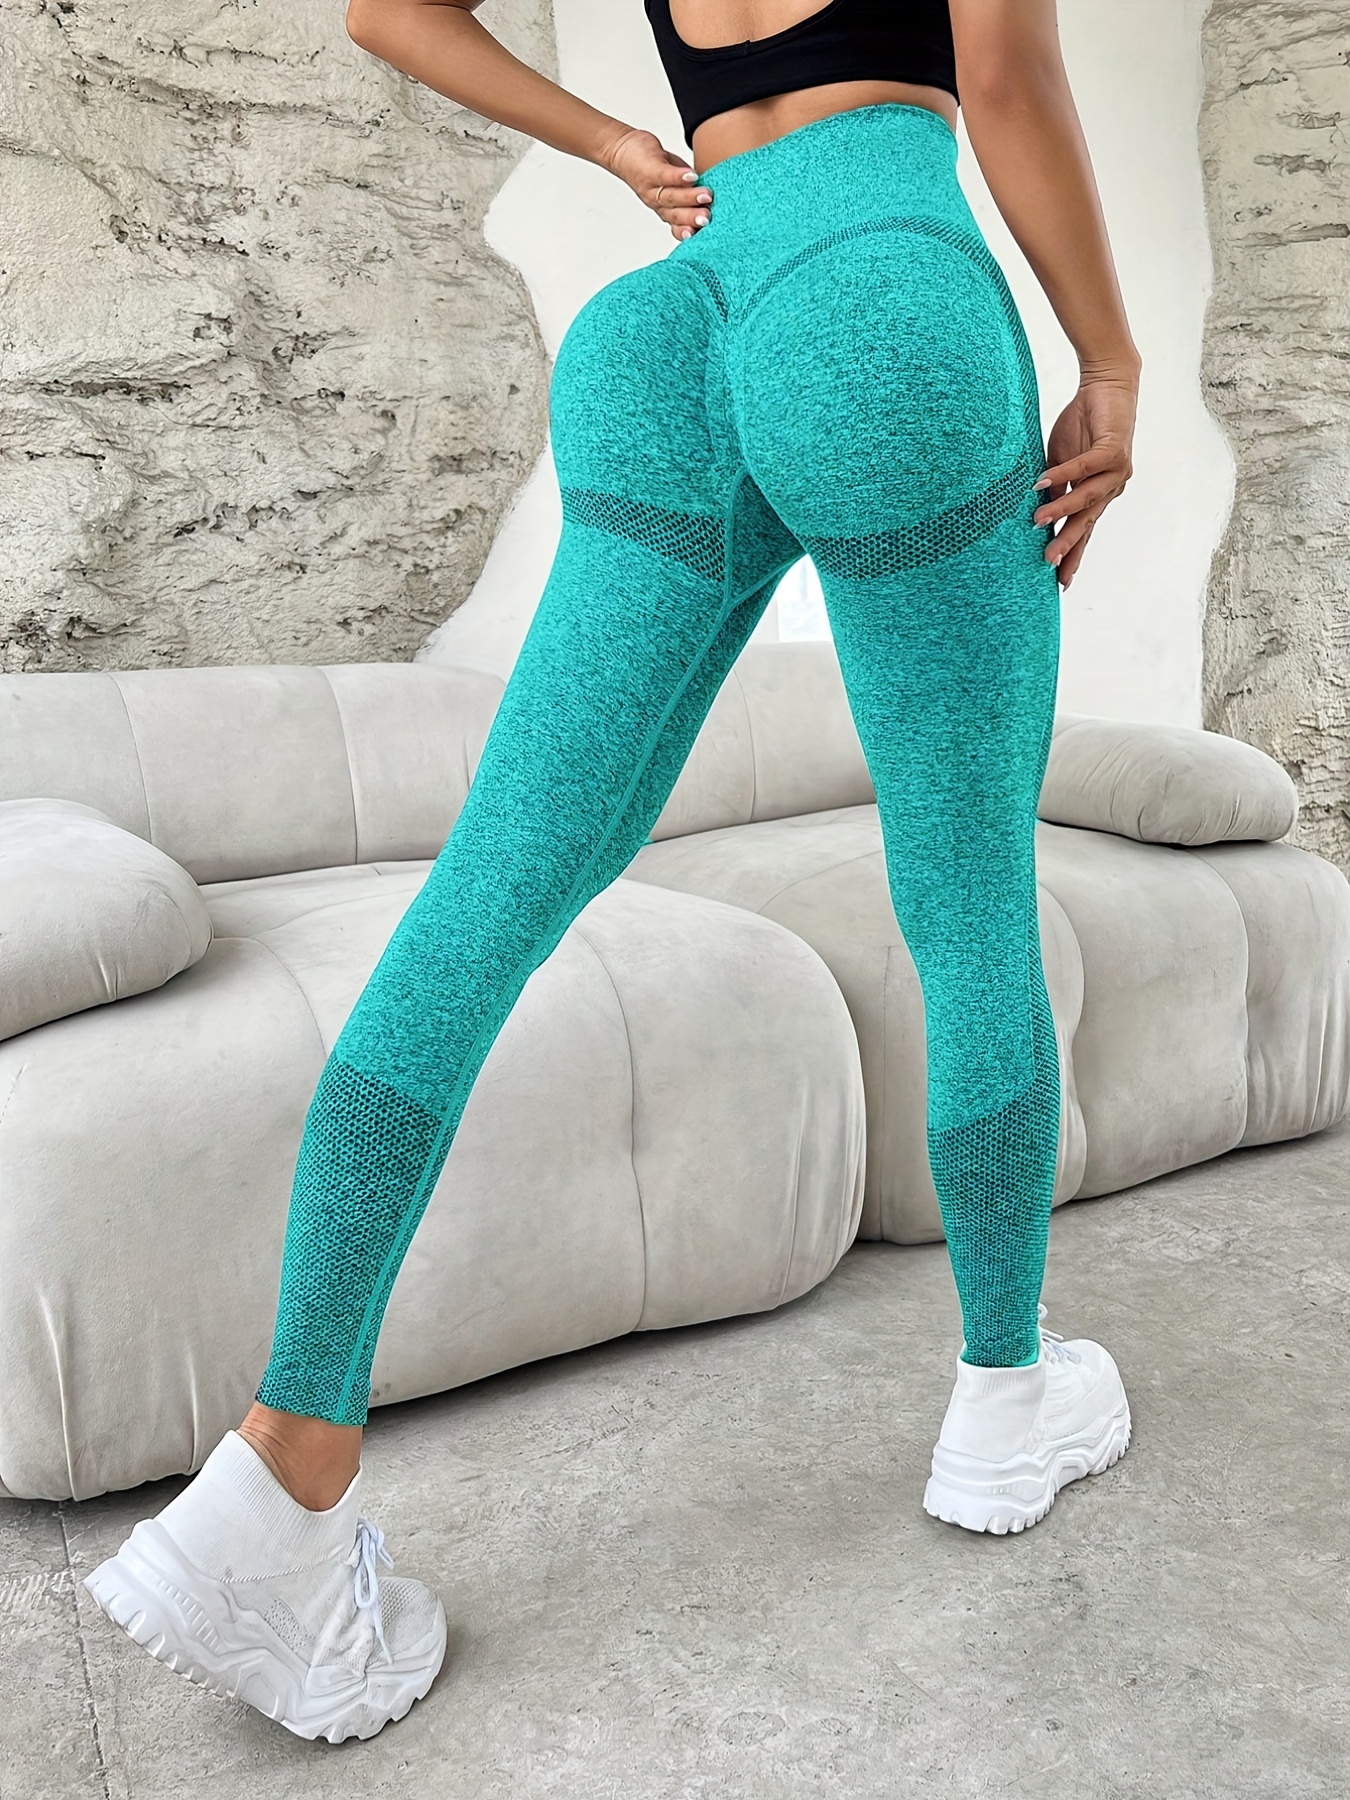 Yoga Pants for Women,Hot Seamless Knit Hips Hygroscopic Sweating